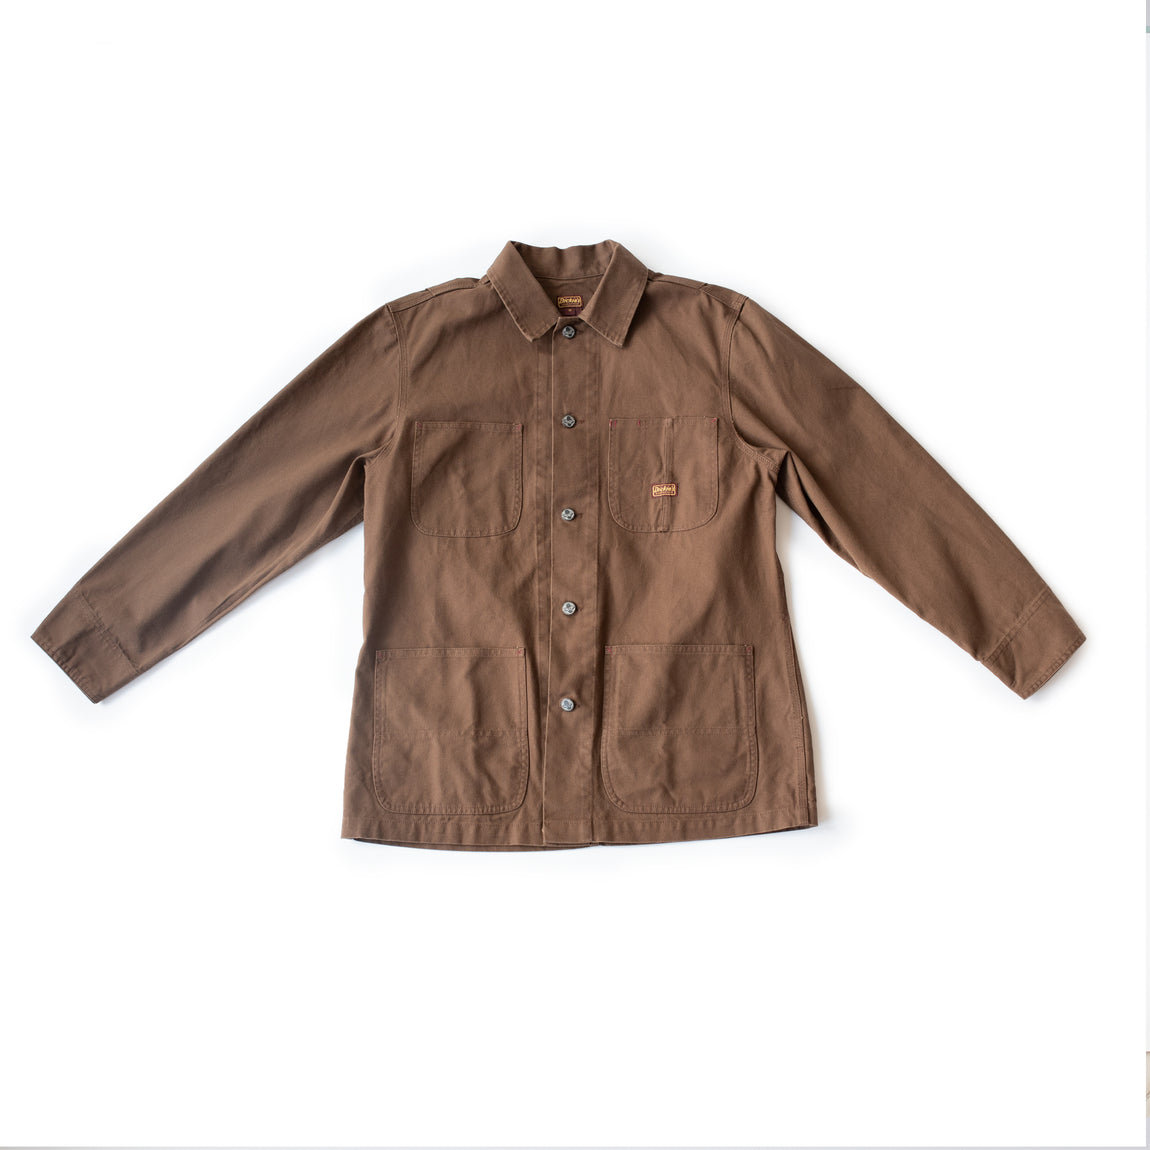 Dickies 1922 Chore Jacket (Timber Brown Duck Canvas) - Dickies 1922 Chore Jacket (Timber Brown Duck Canvas) - 